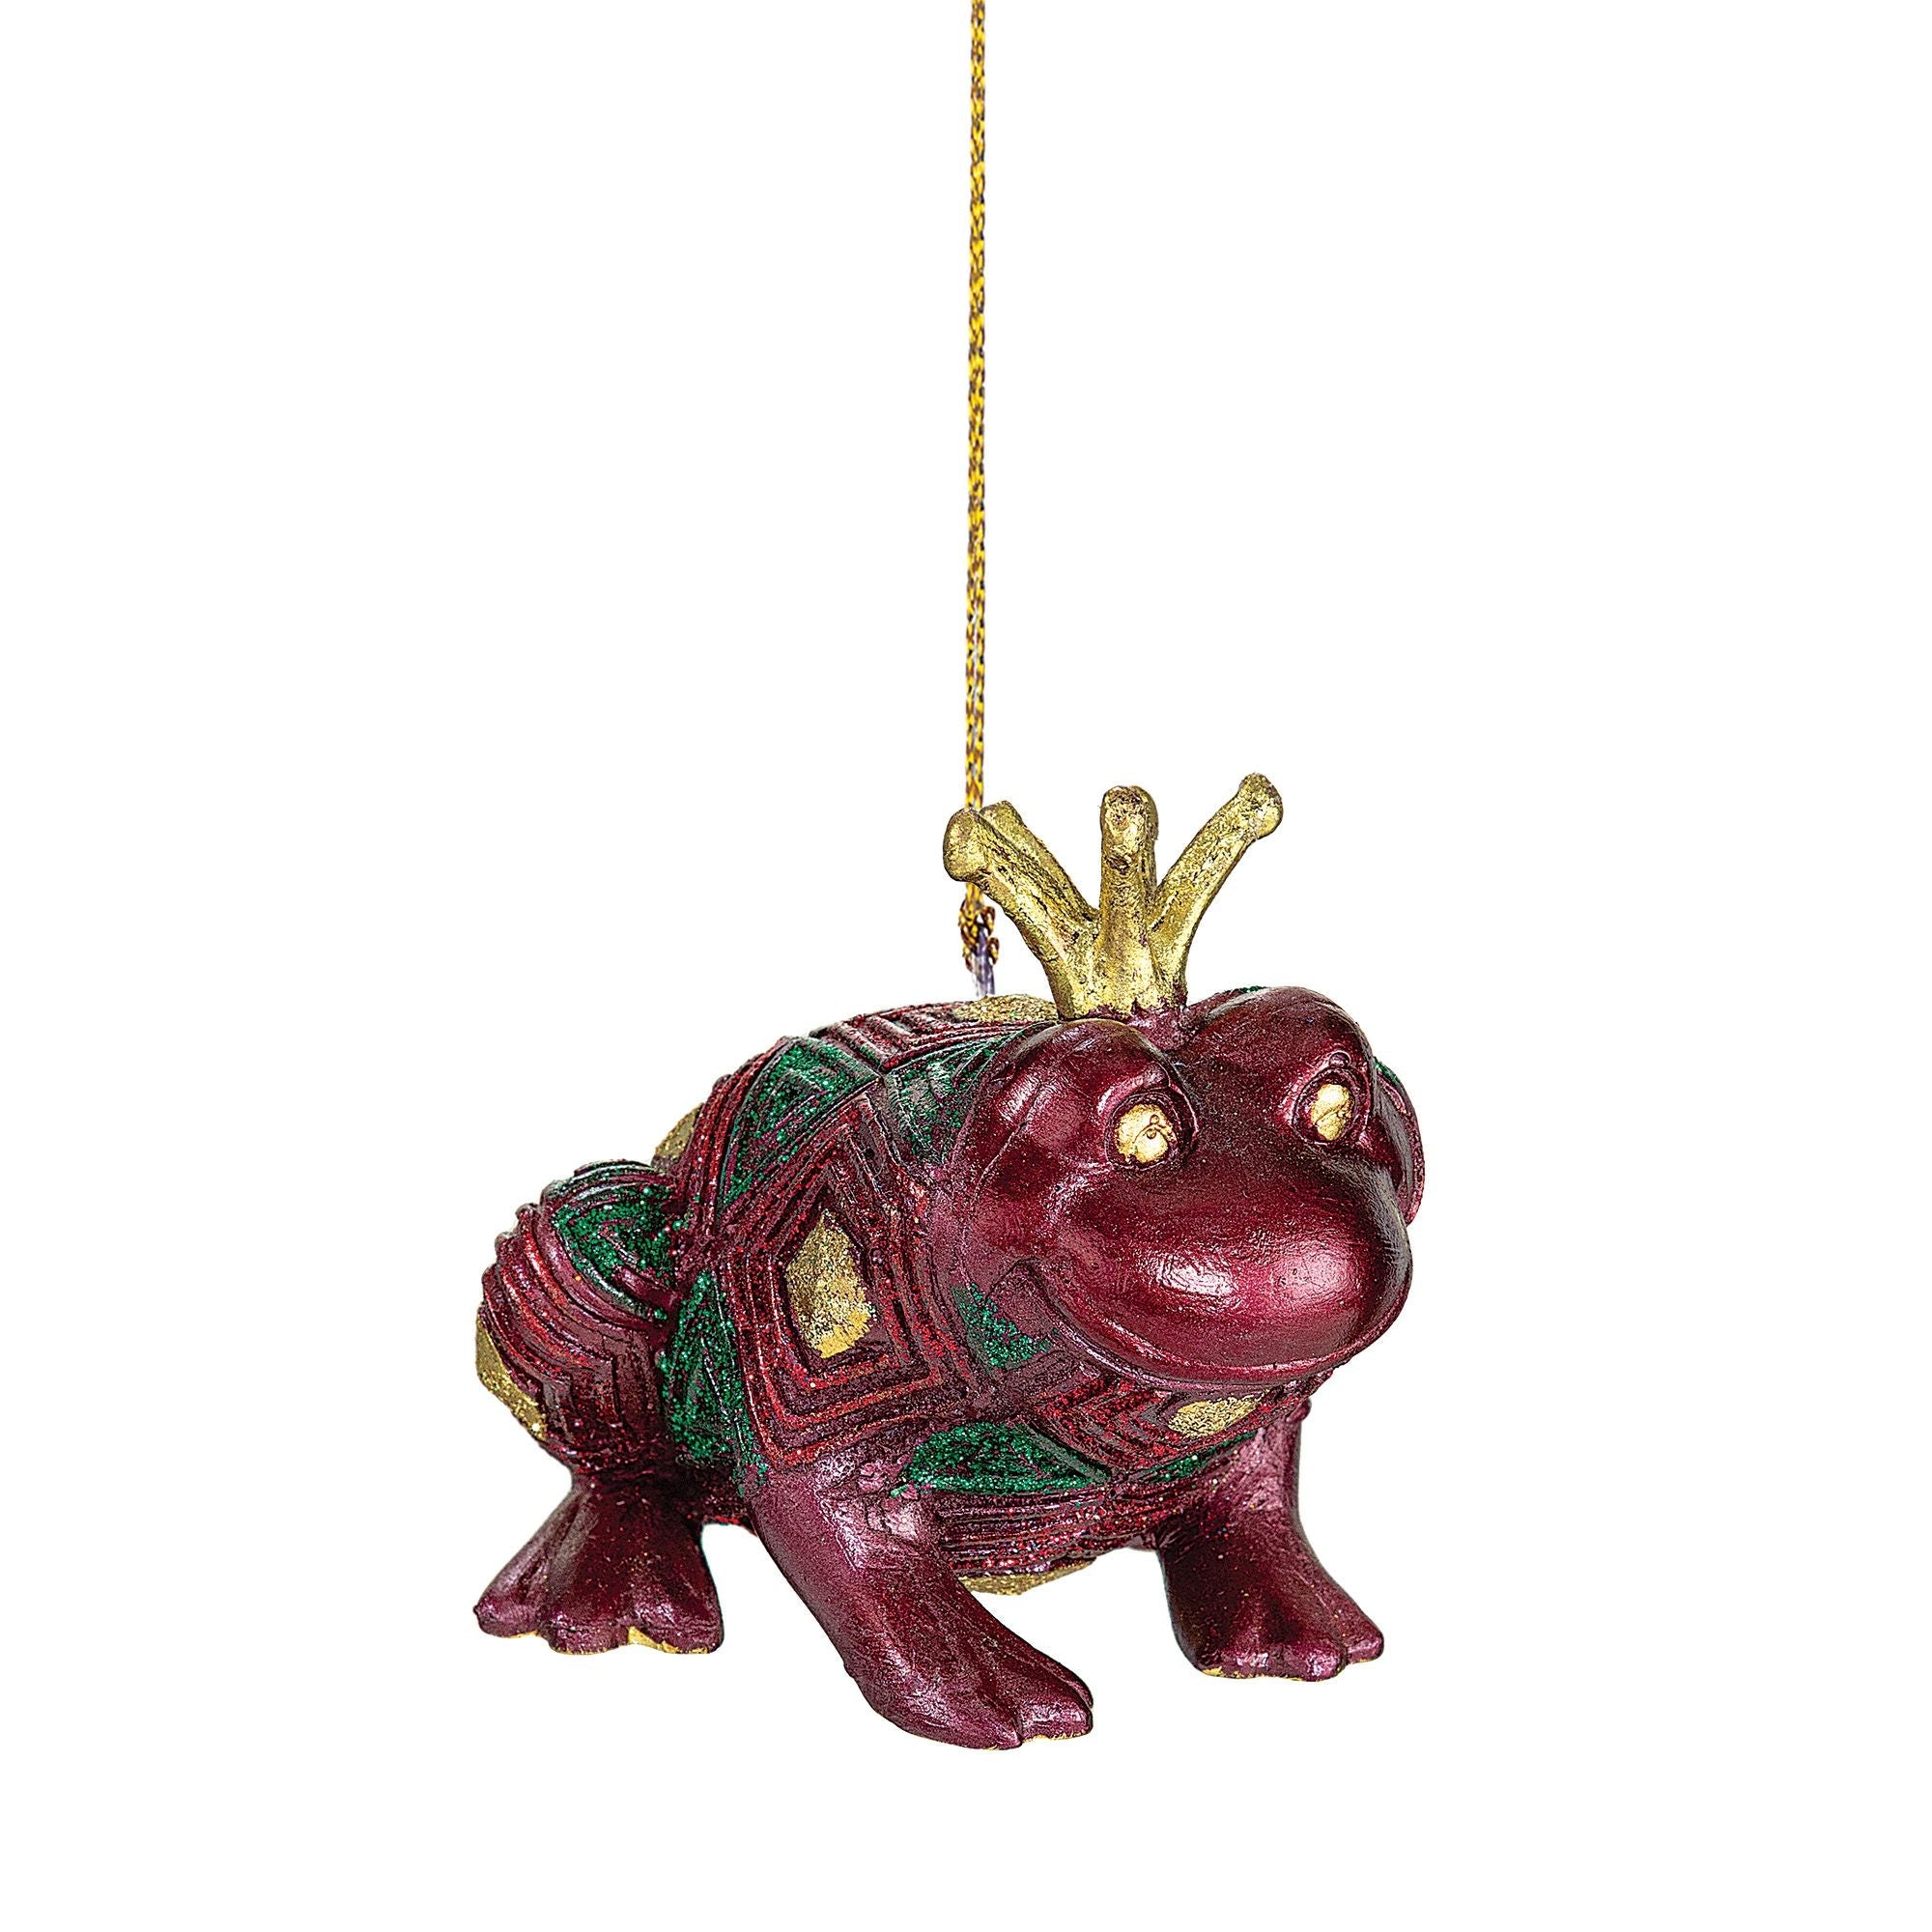 Hand-Painted Sparkling Frog Prince Ornament